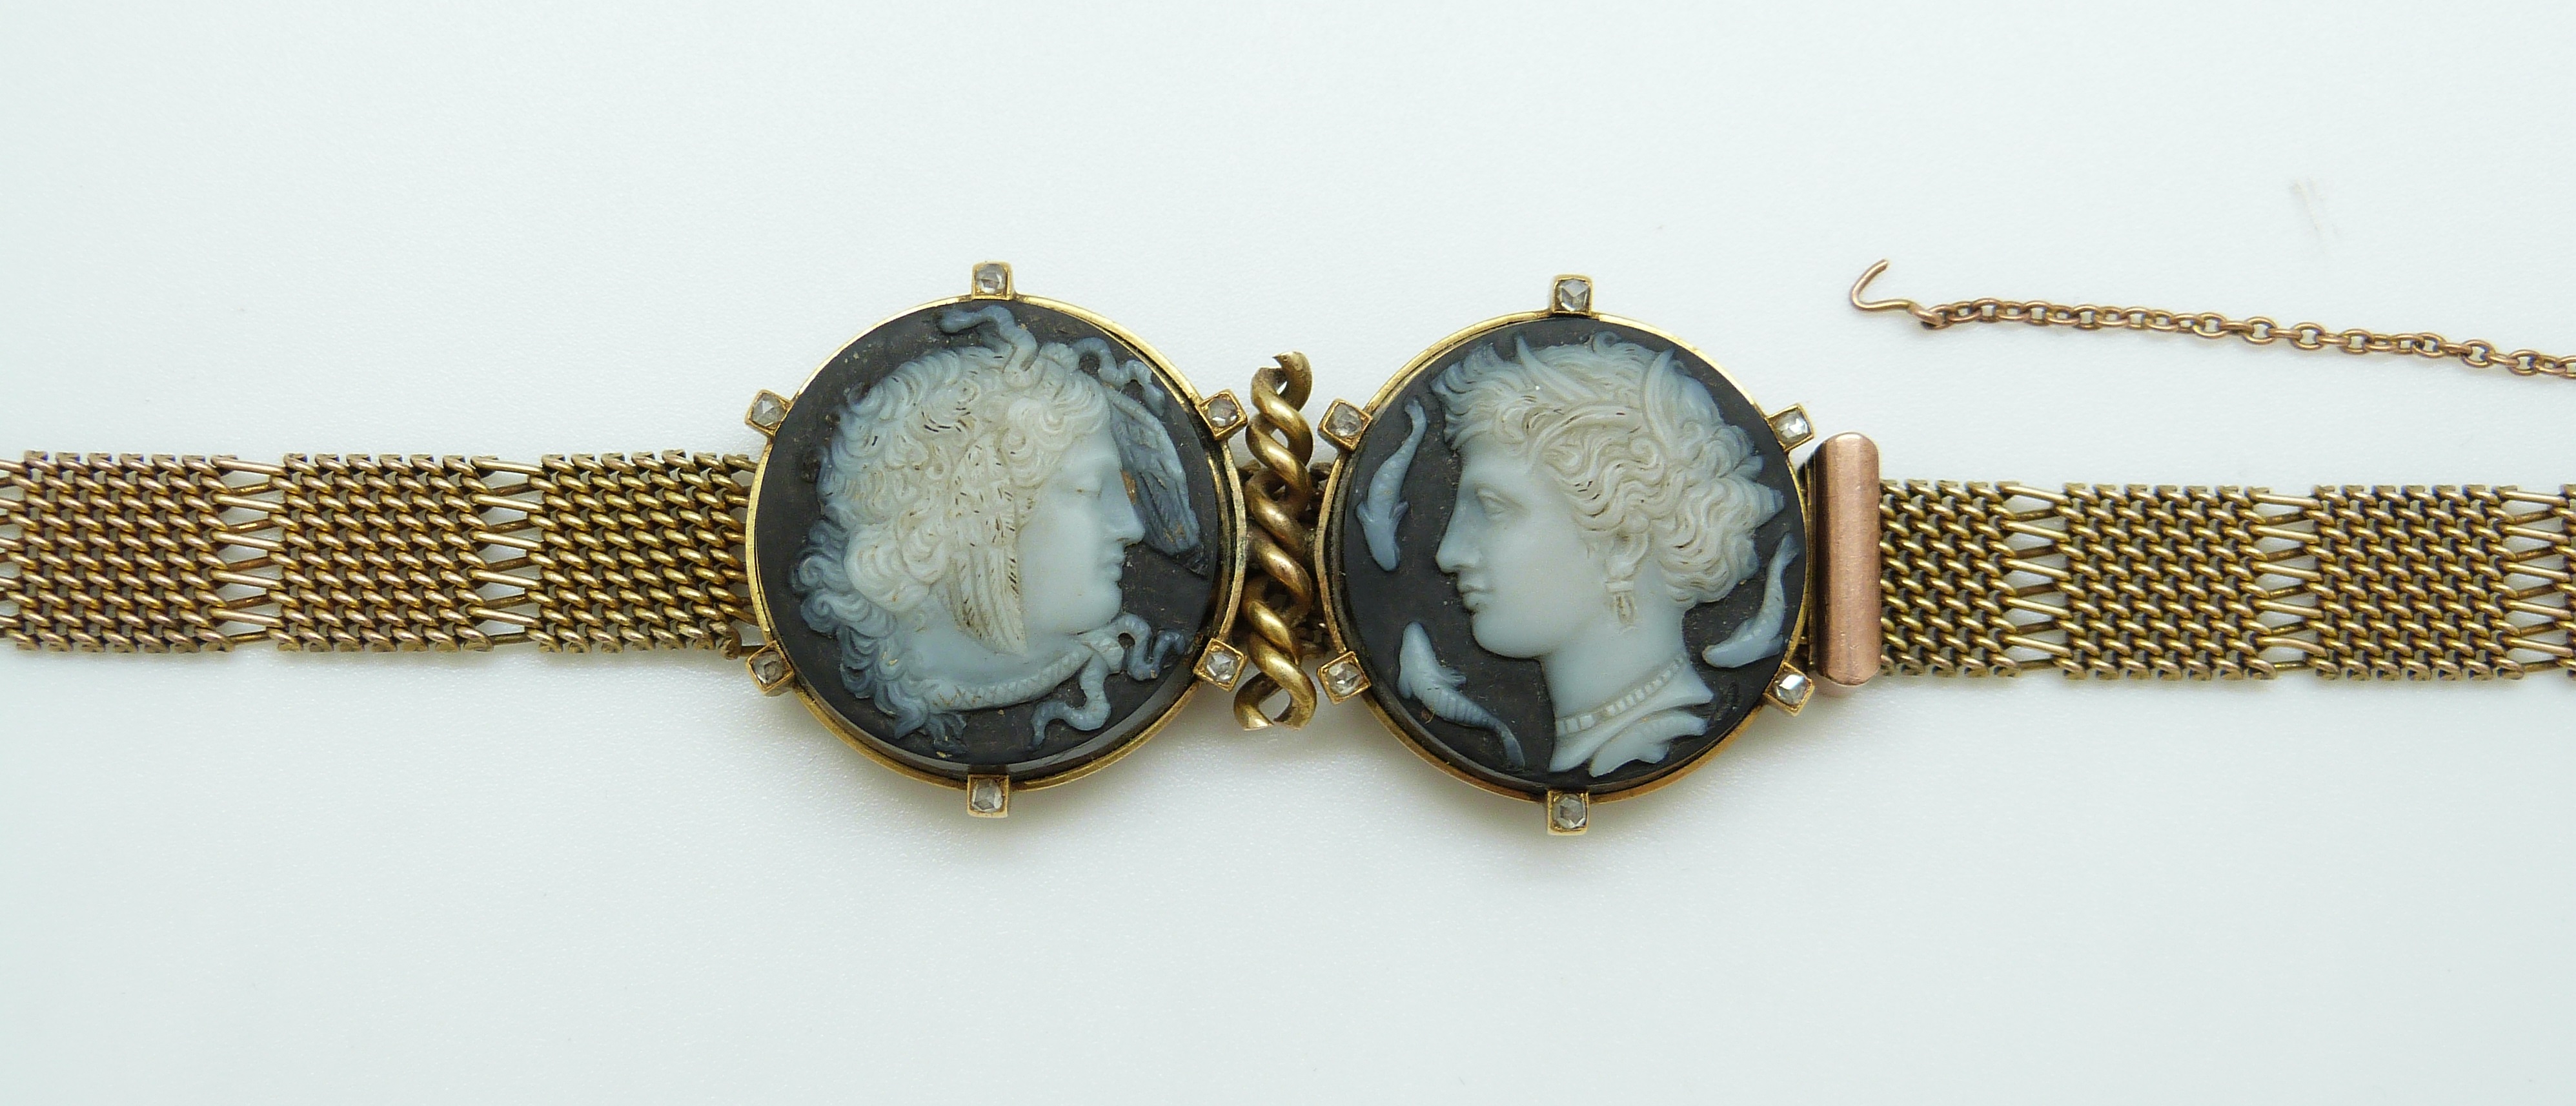 A 9ct gold Victorian bracelet set with two finely carved hardstone cameos depicting day and night, - Image 3 of 6